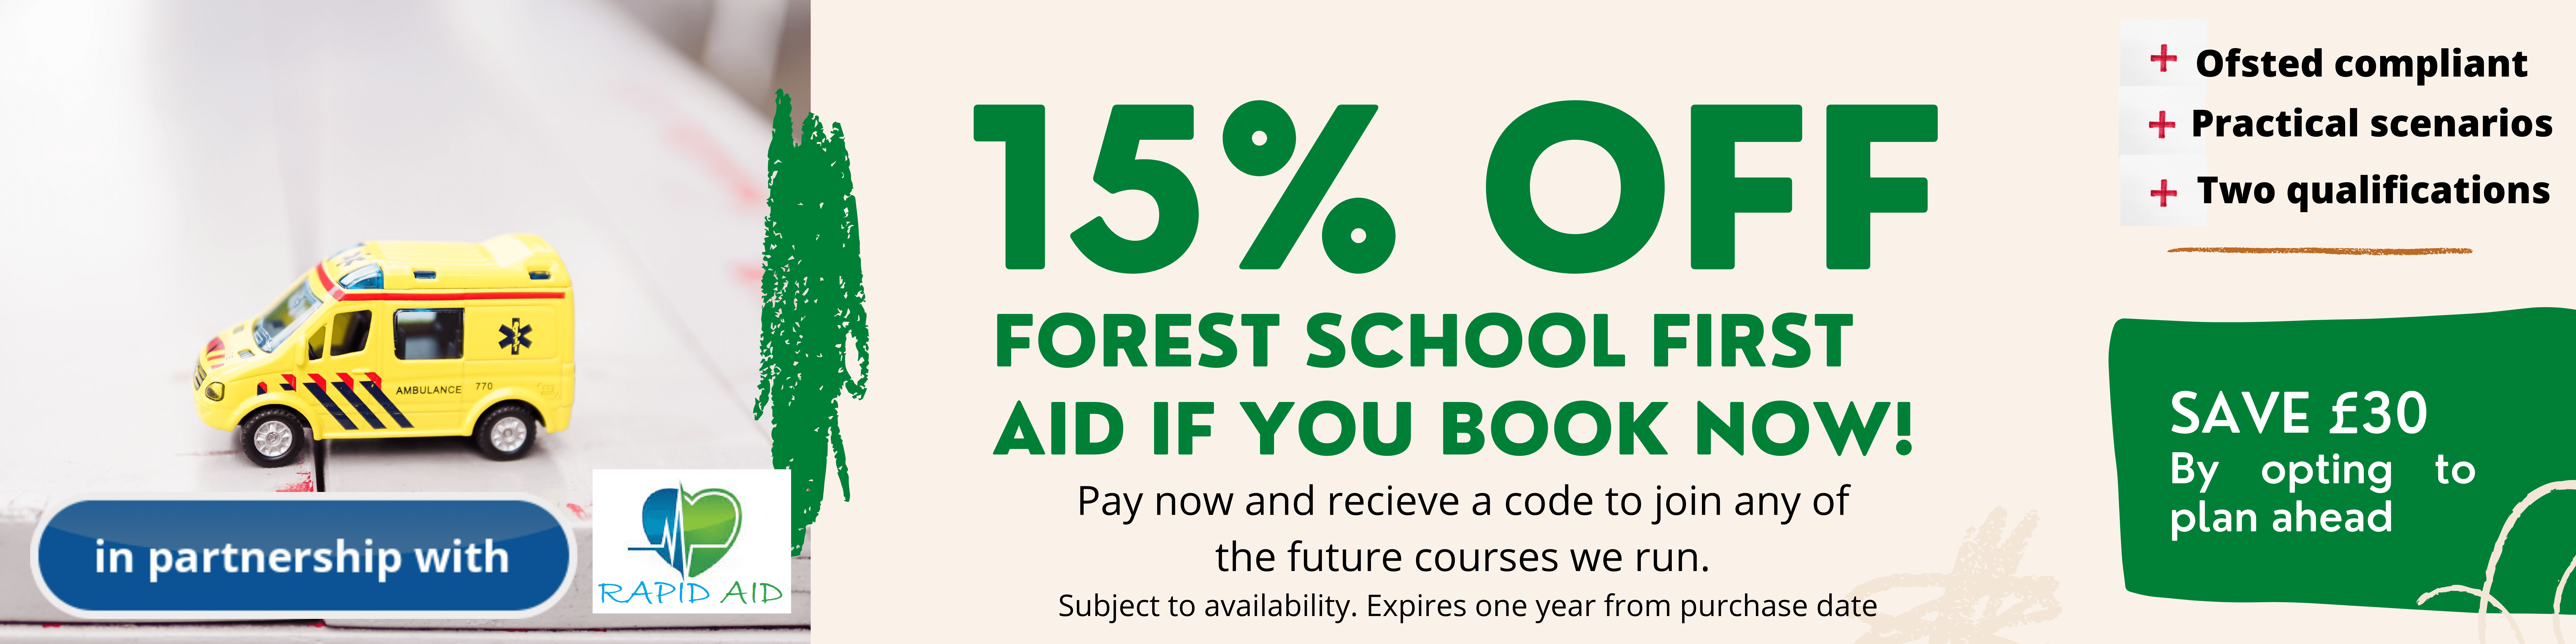 FirstAid_discount Forest School Leader Training - June 2022